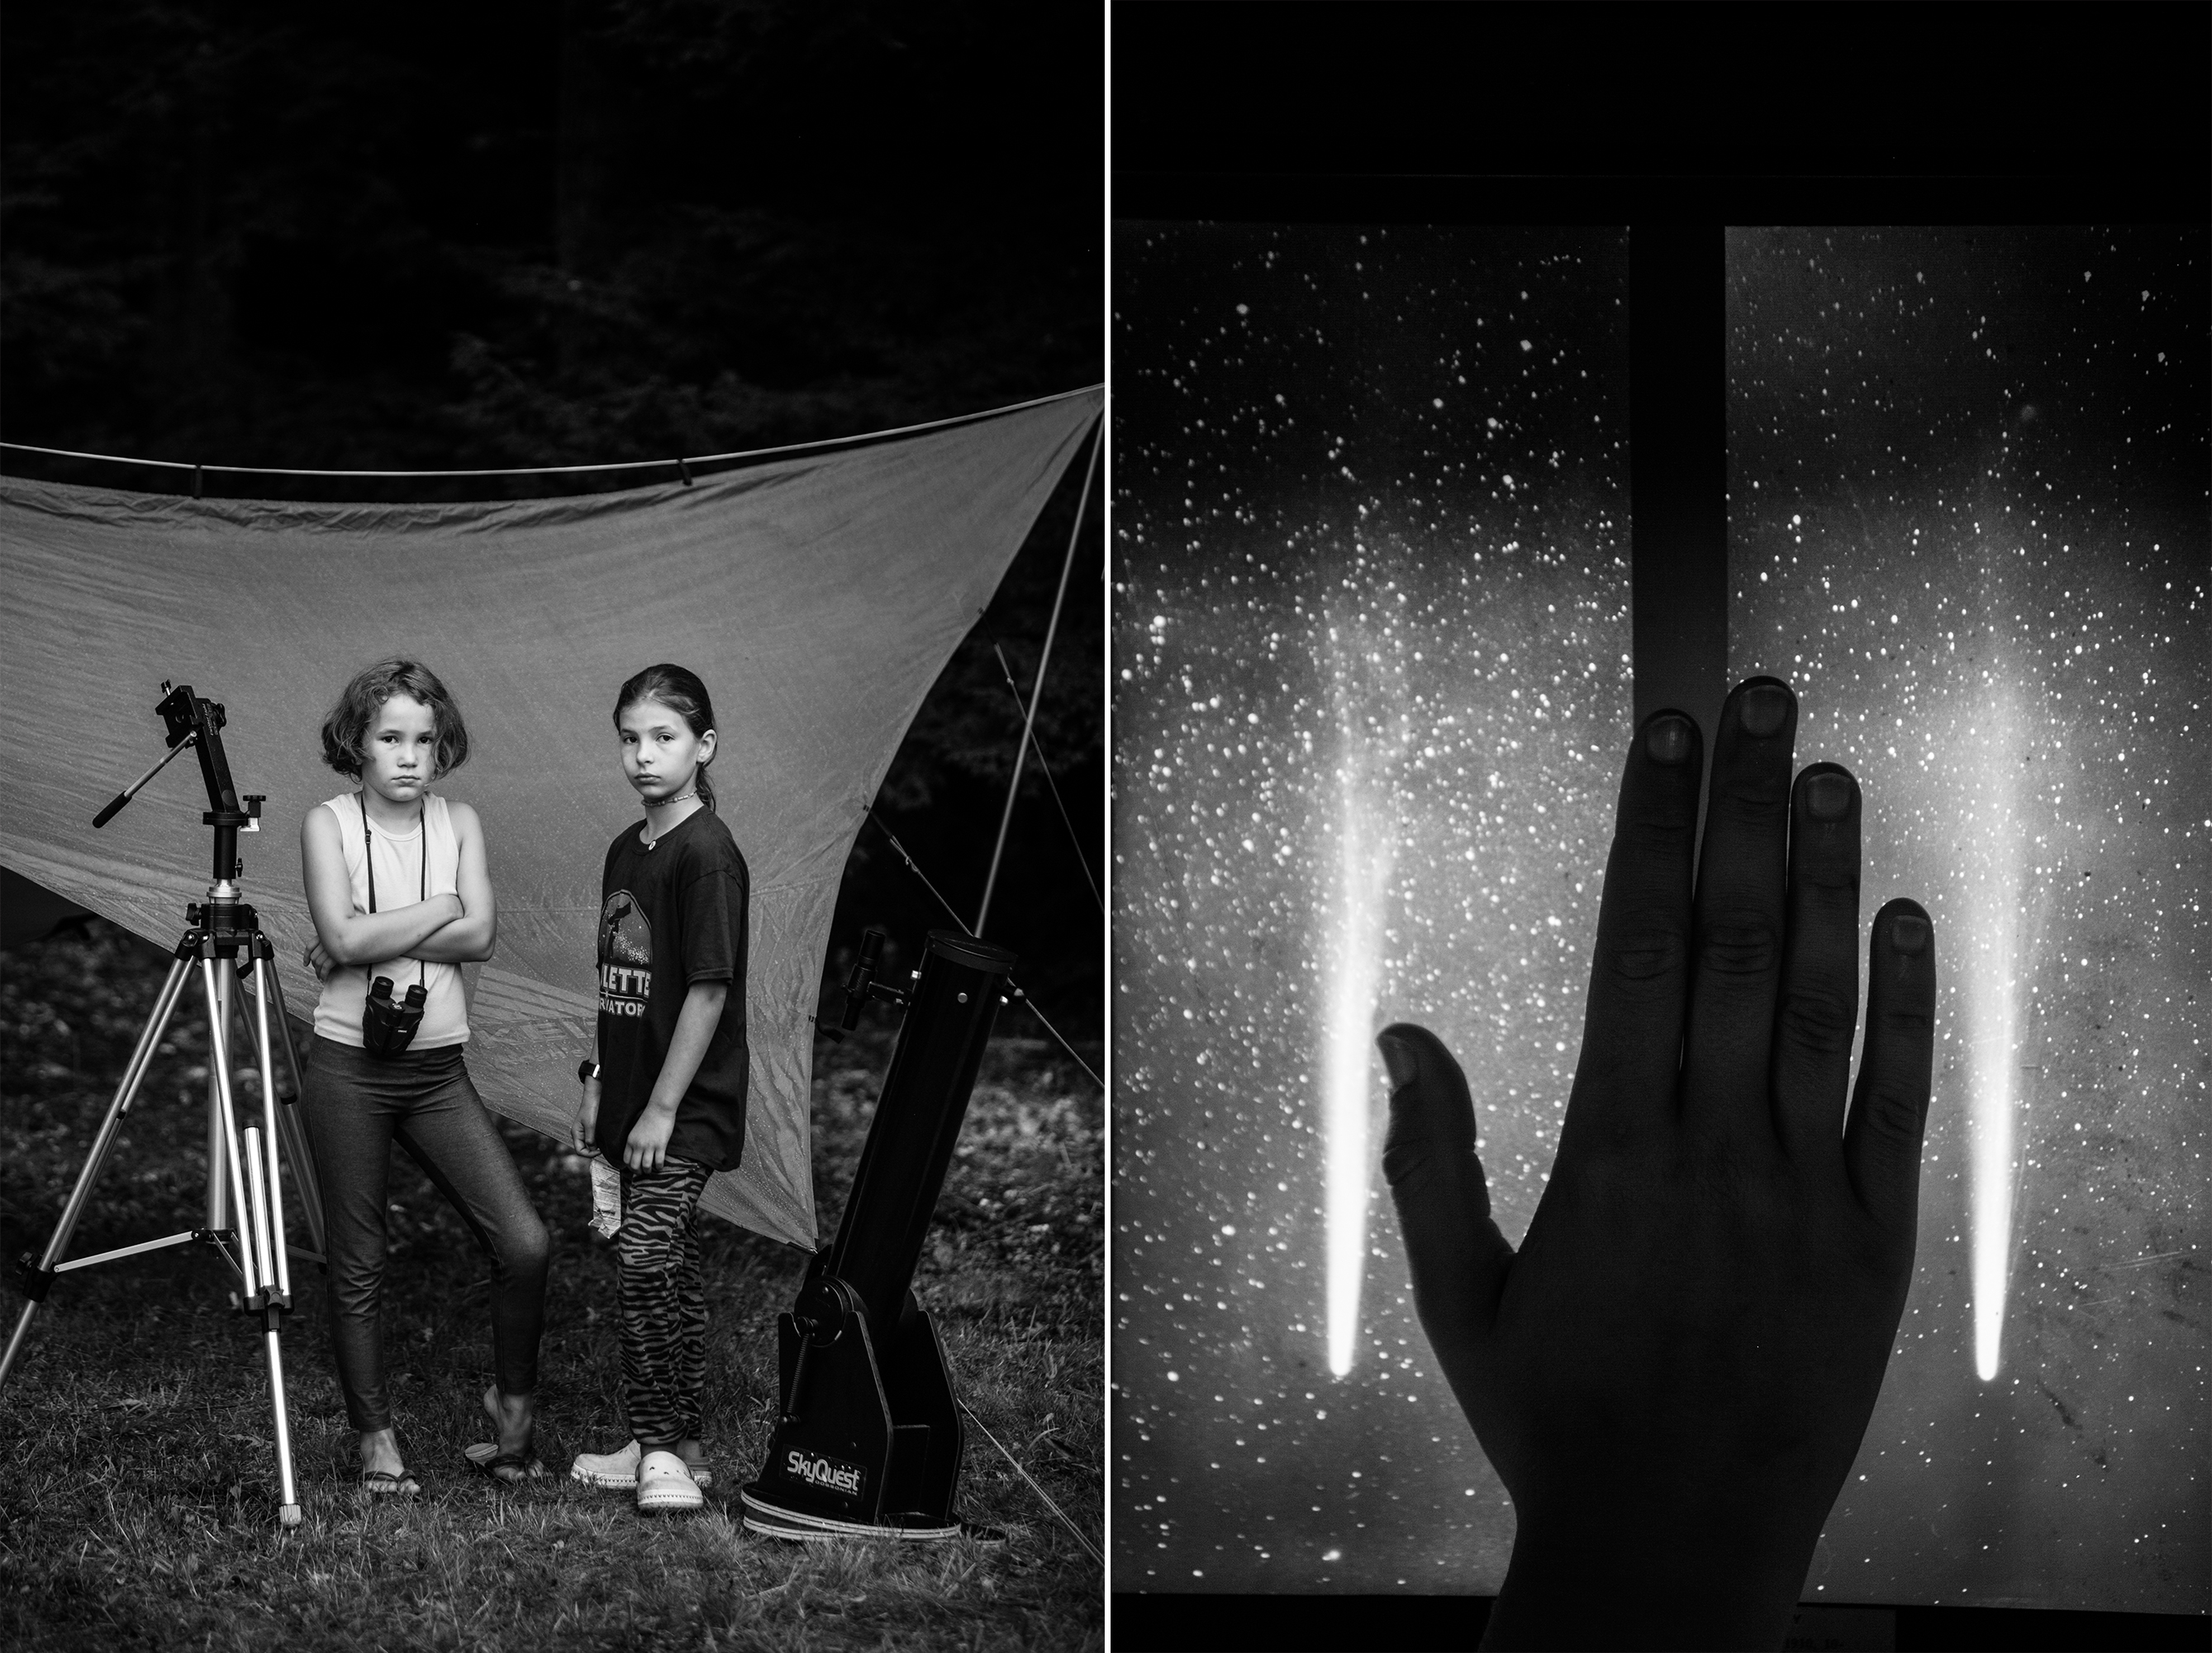 LeeAnna Goulette, 8, and Kaitlyn Goulette, 10. The sisters were encouraged by their parents to develop an interest in astronomy. (Robert Ormerod for TIME)